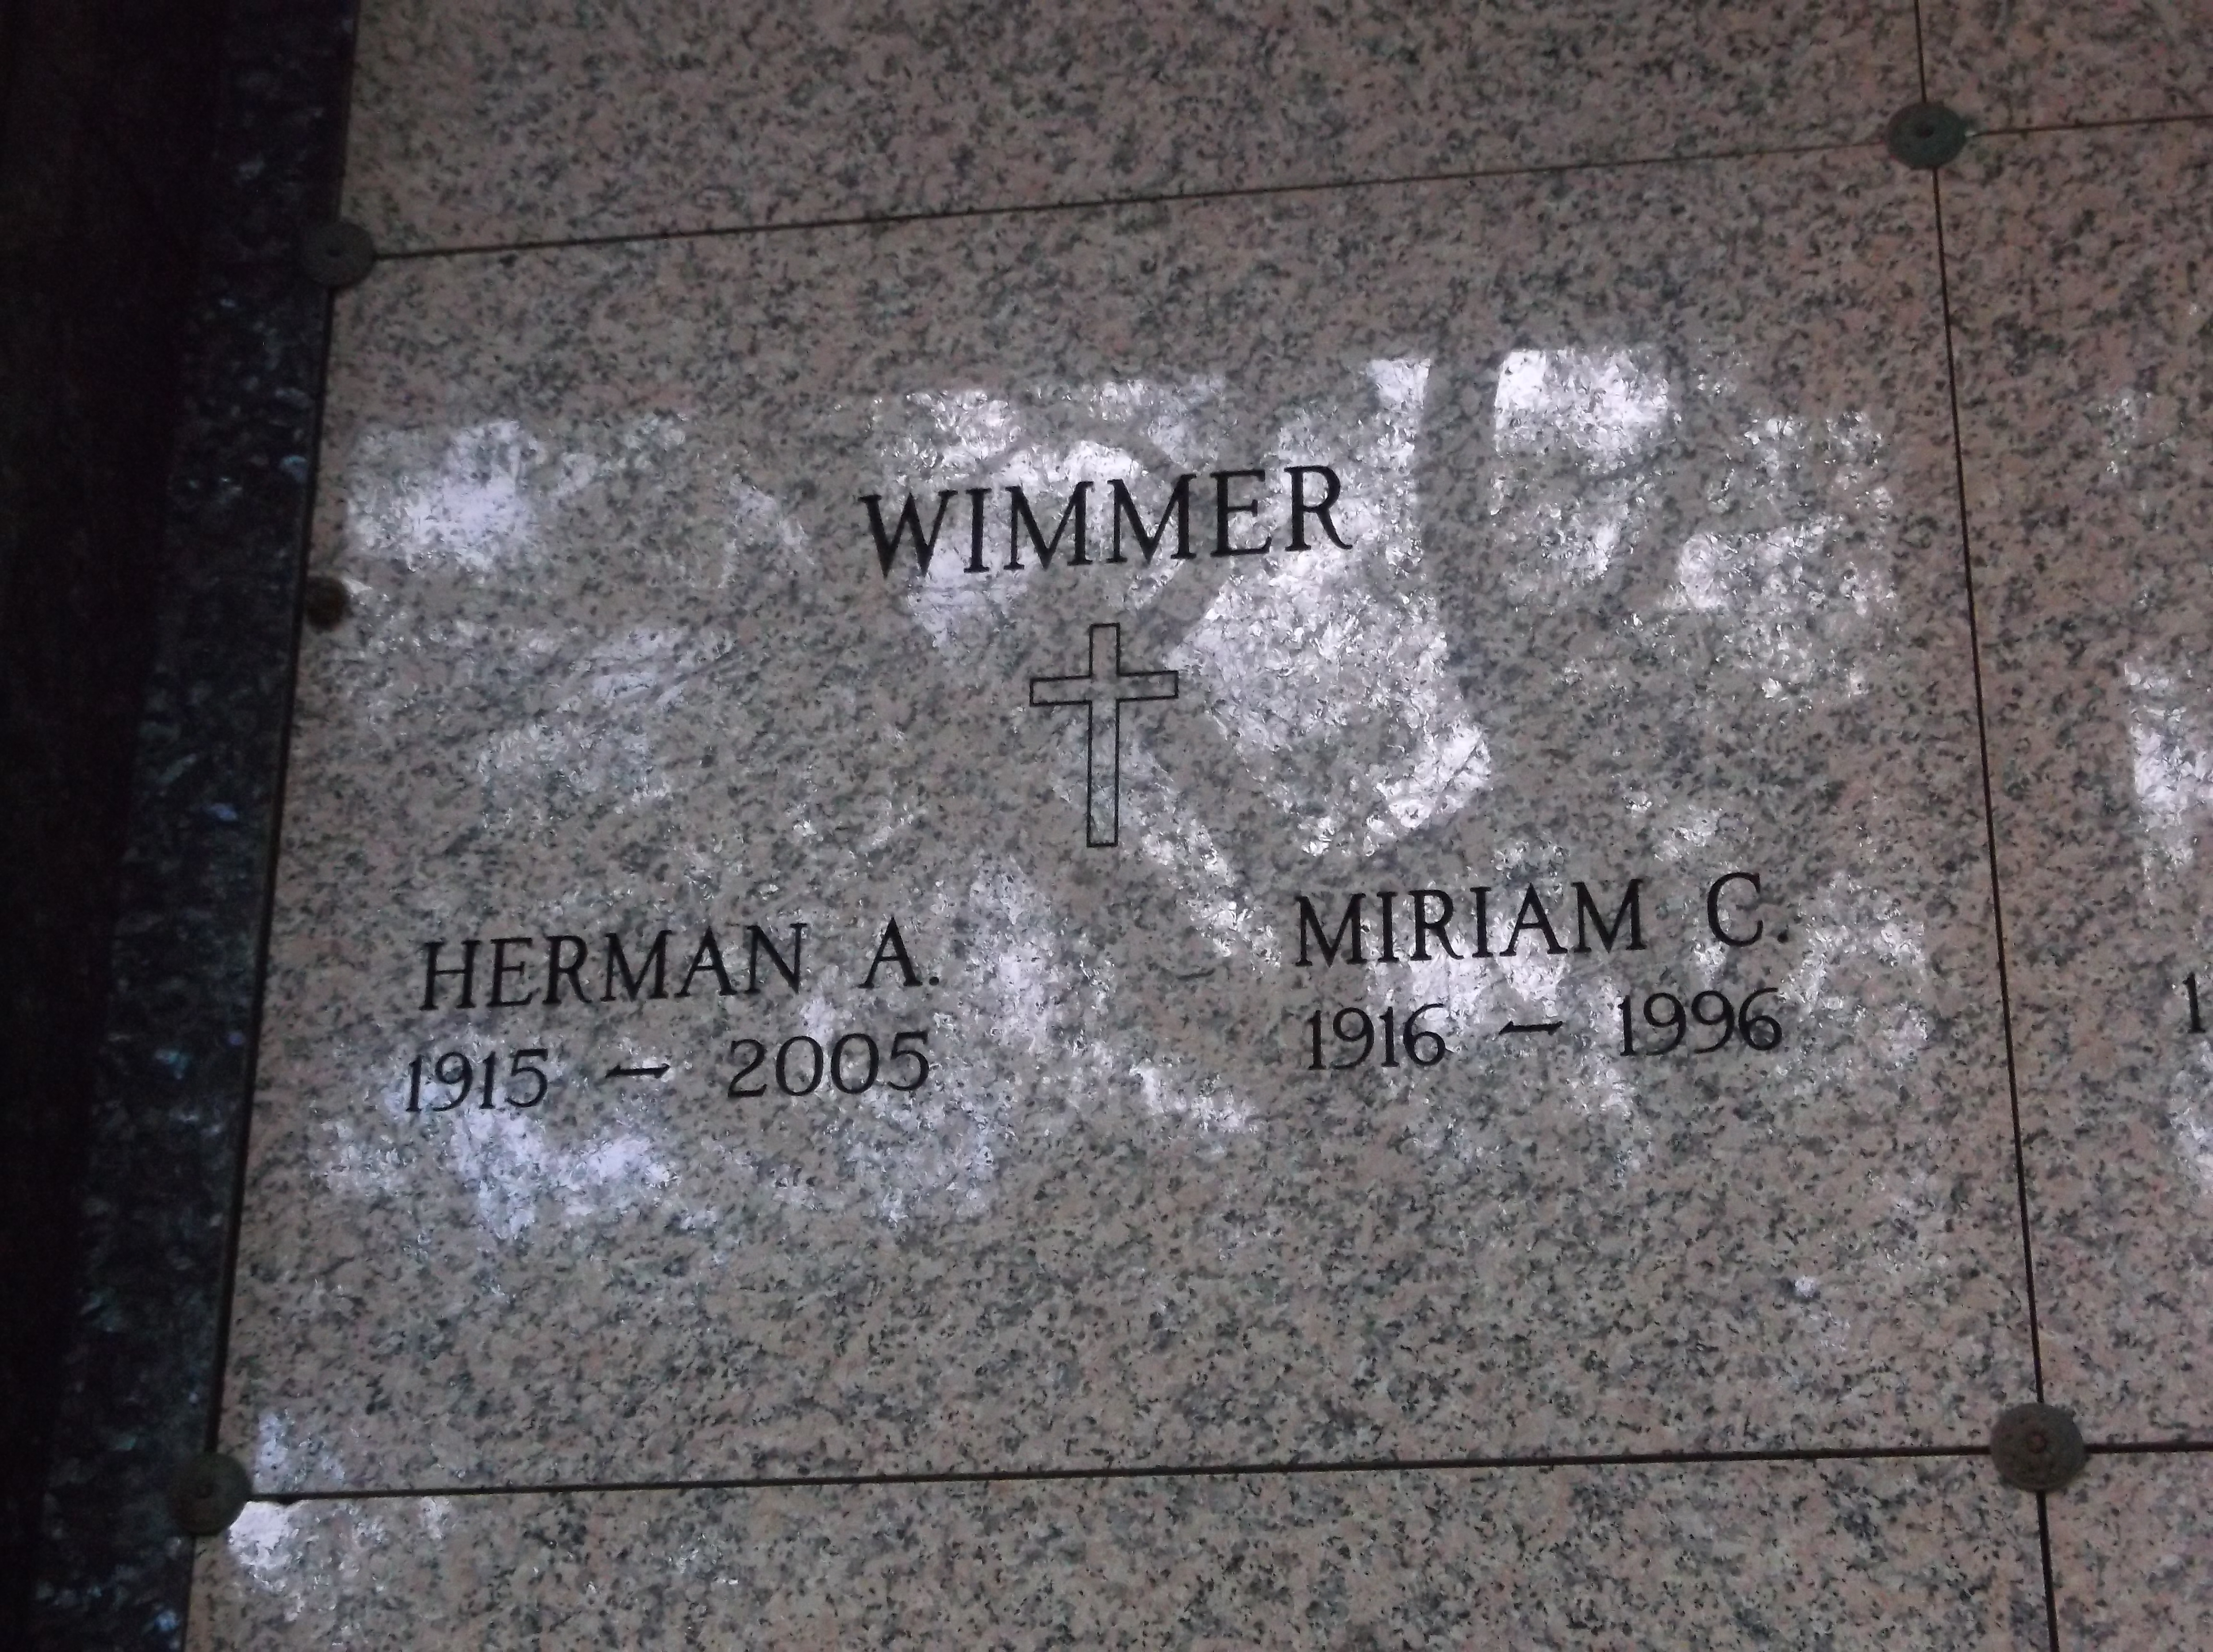 Herman A Wimmer